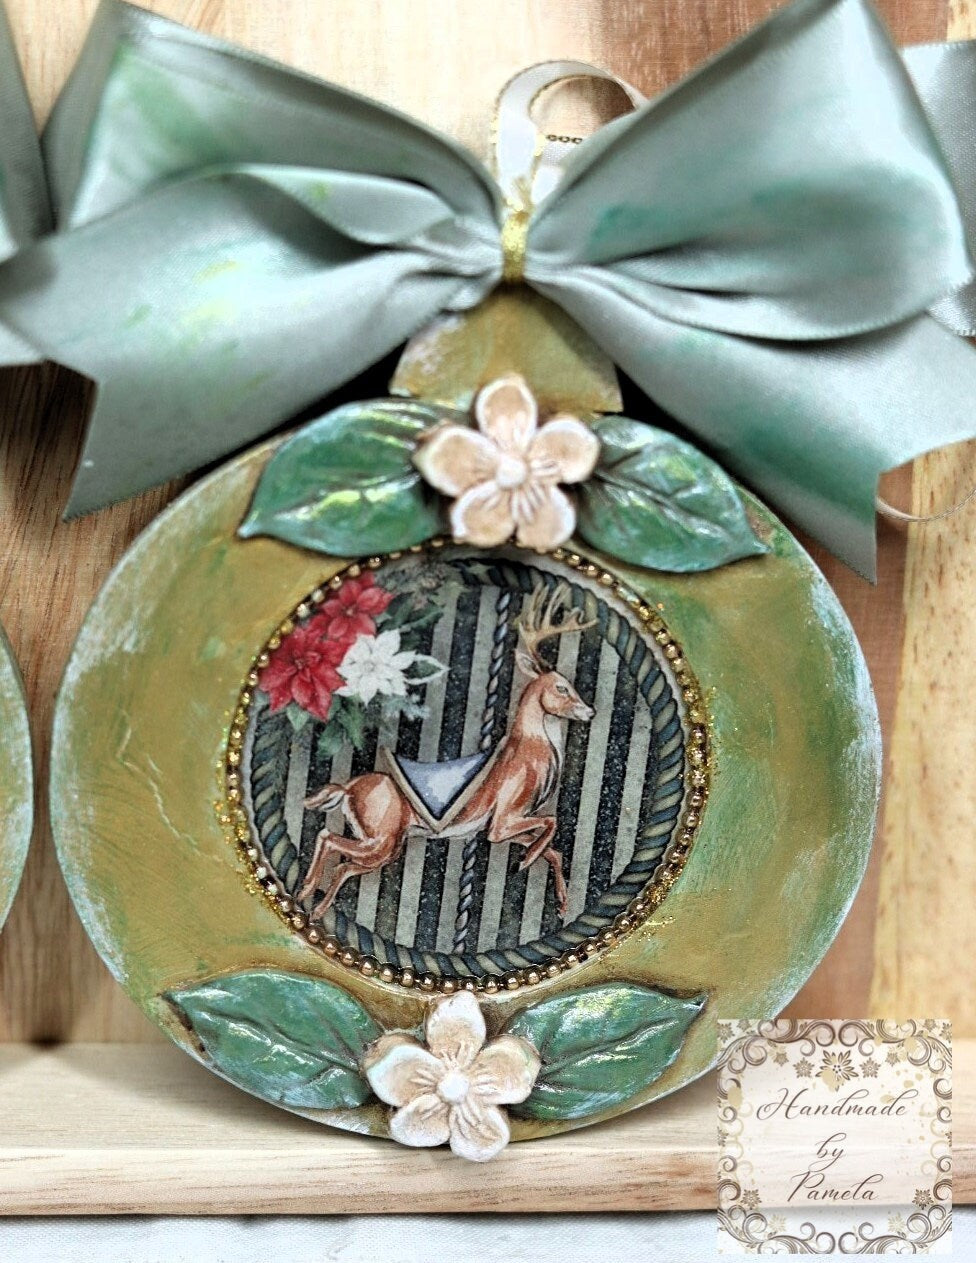 Handcrafted, Carousel Horses, Christmas Ornament Set 2, Decoupage, Mixed Media, Vintage Style Ornaments, Gold, Green, Handmade by Pamela